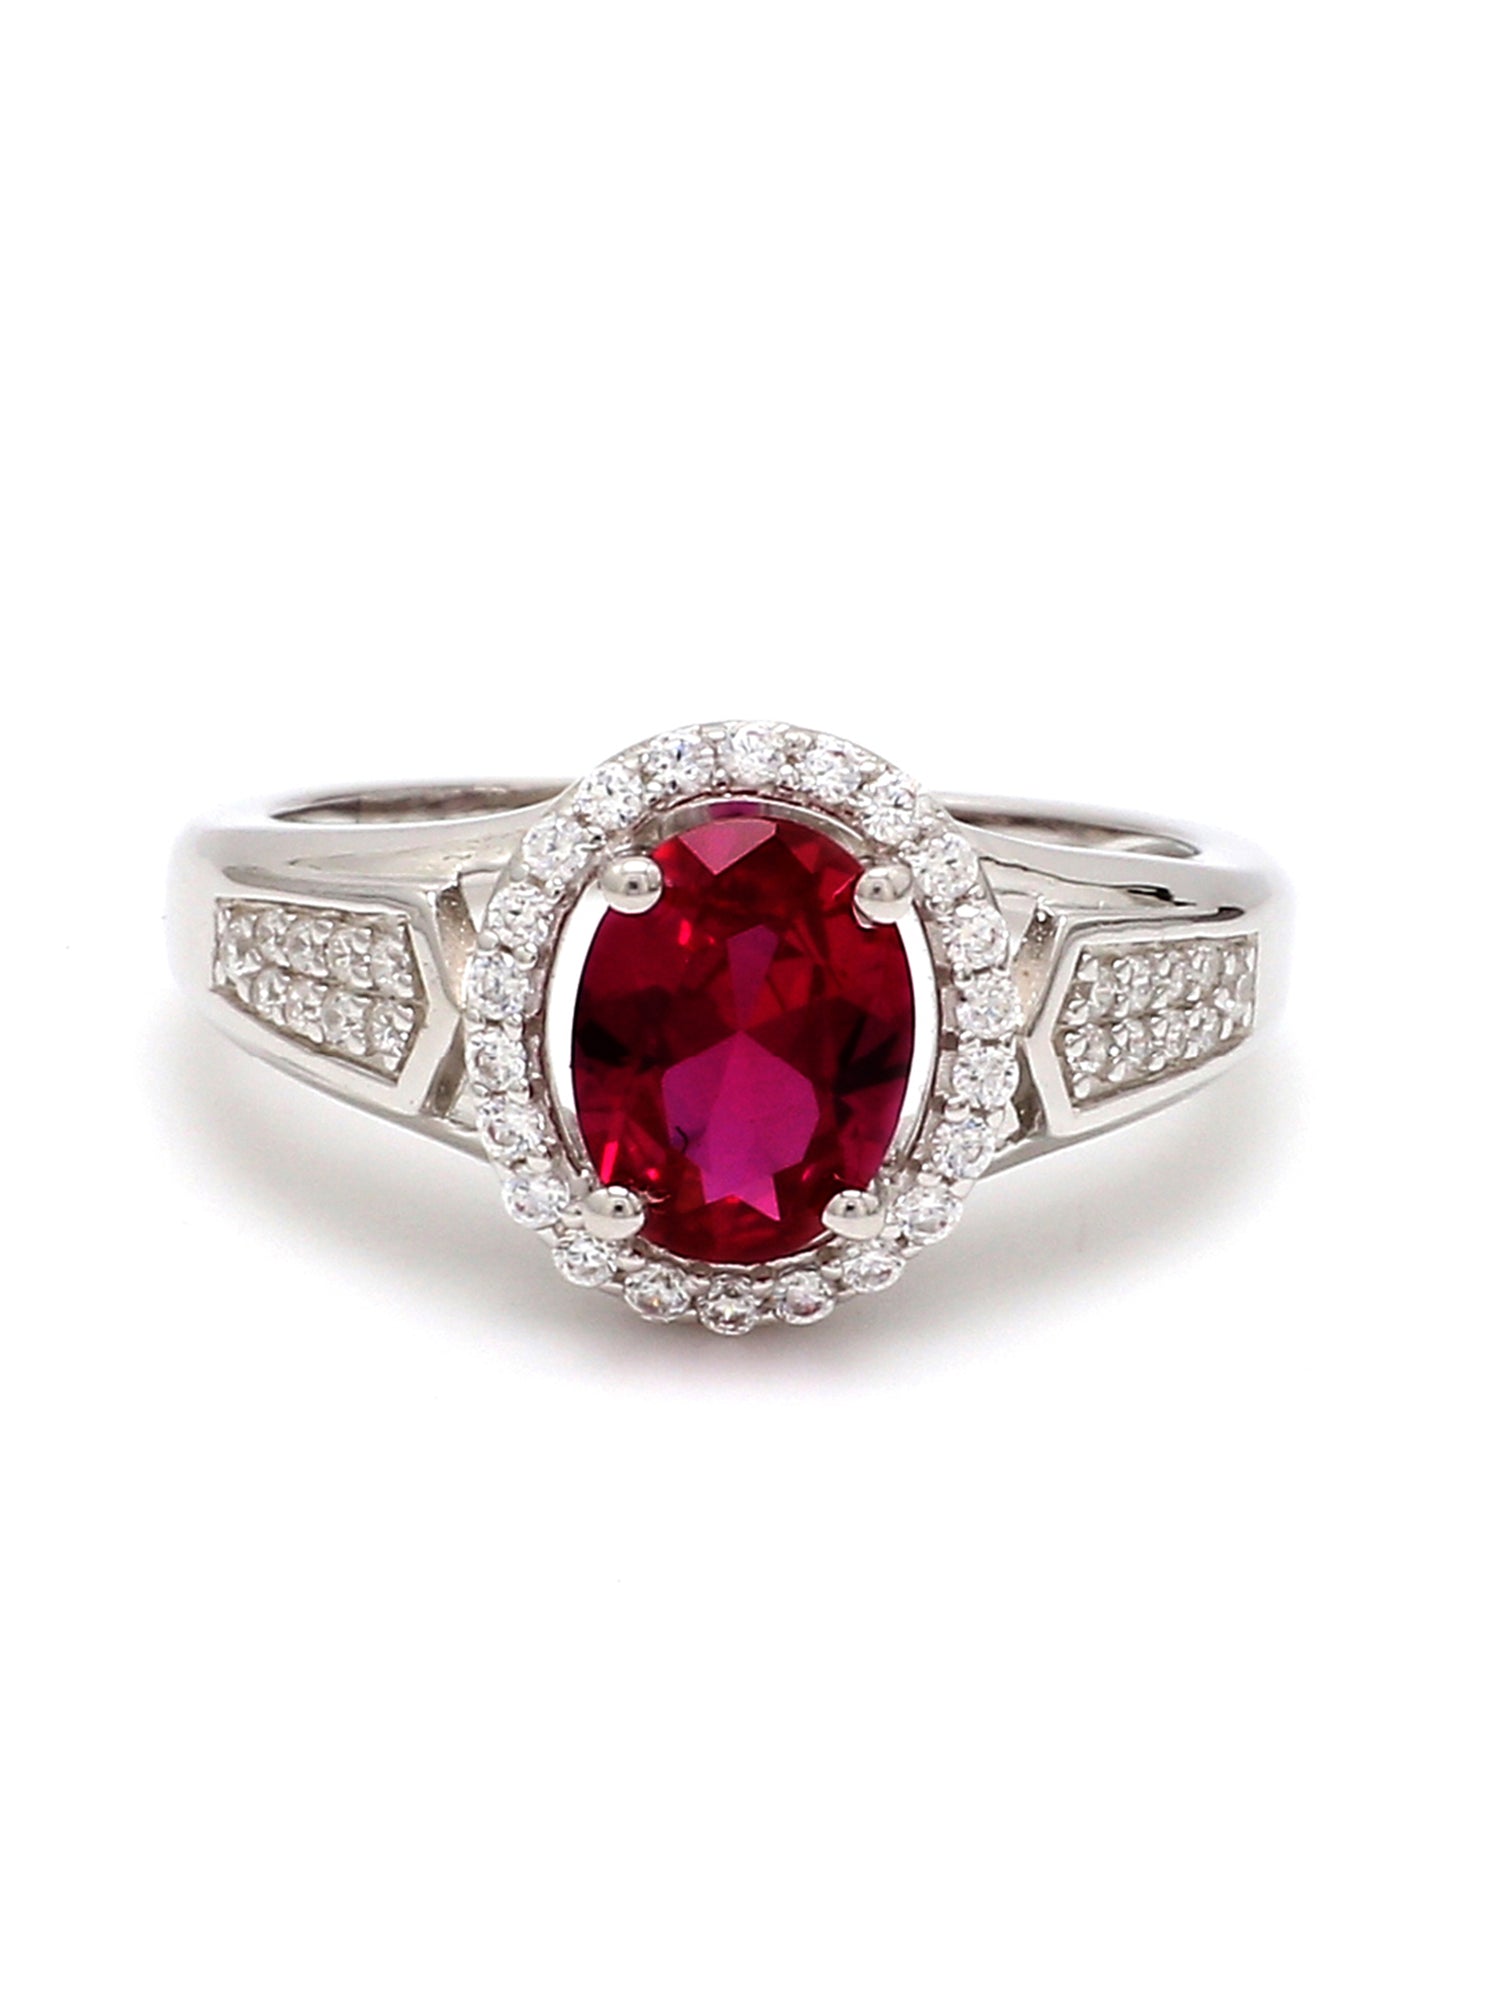 RED RUBY HALO SILVER RING